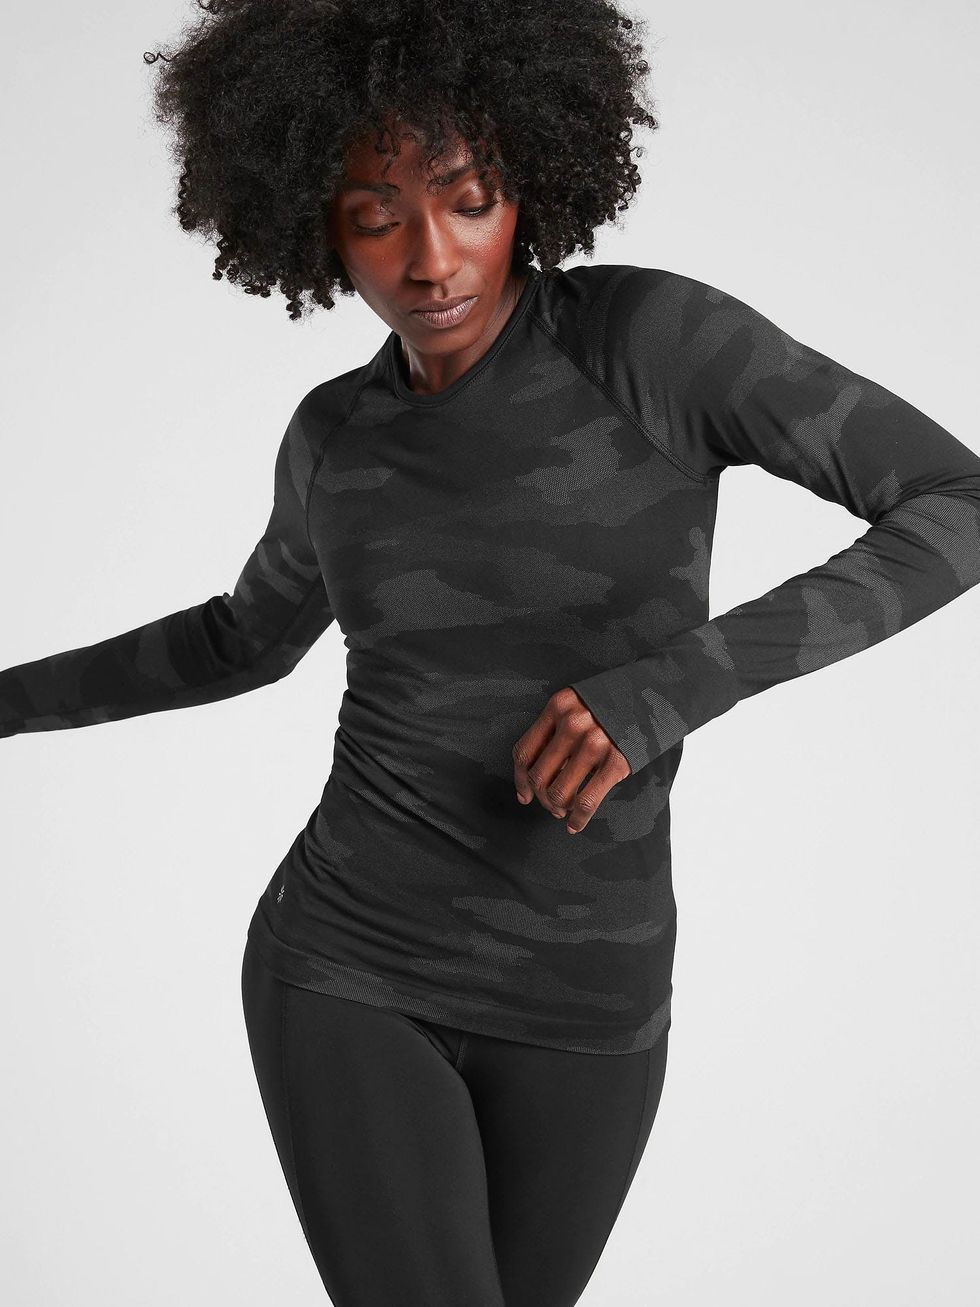 19 Fitness Products to Get You Moving This Season - Brit + Co